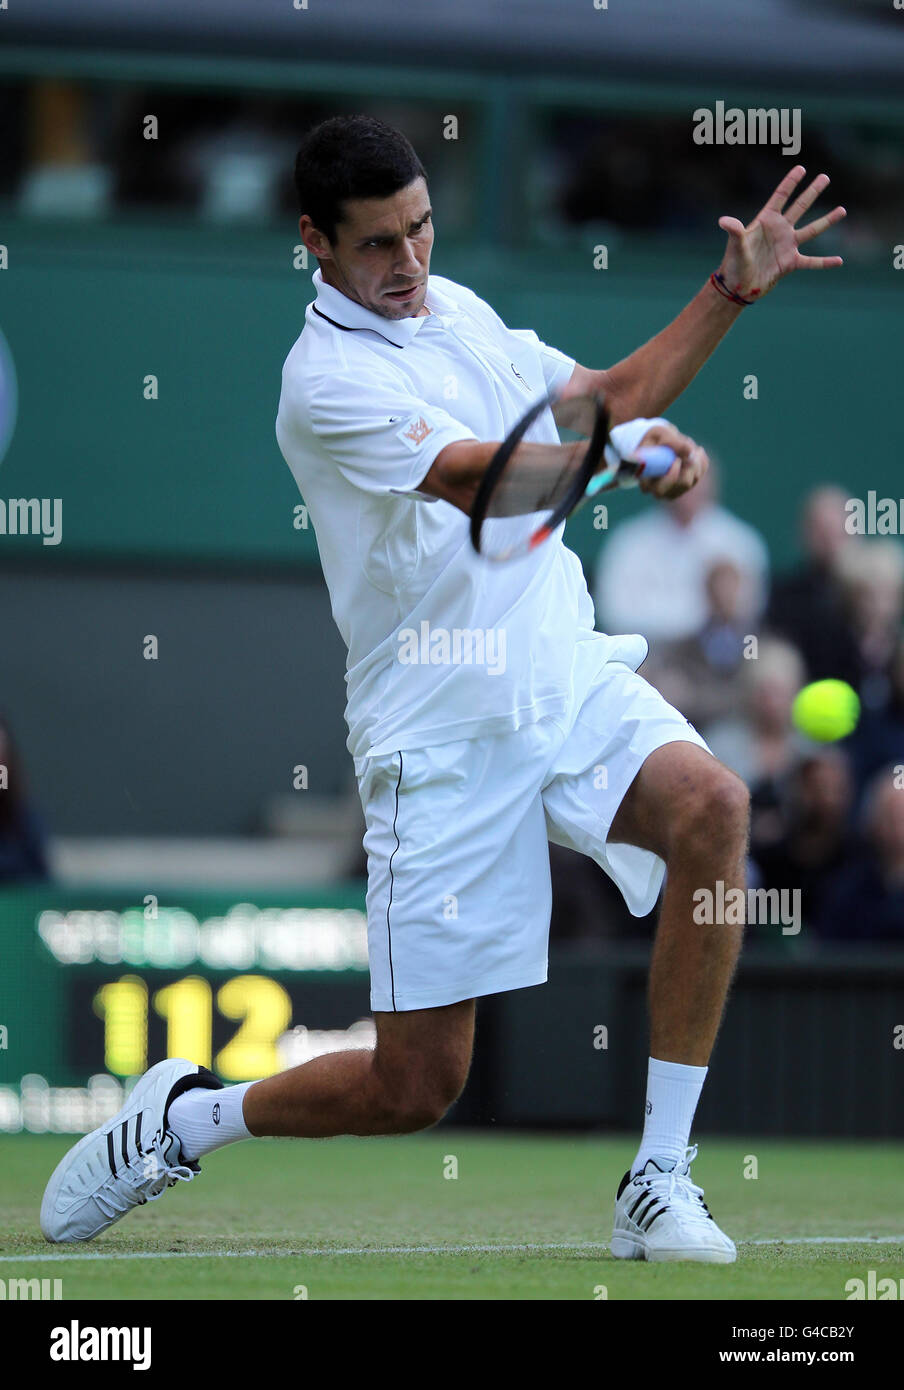 Romania's Victor Hanescu in action against USA's Andy Roddick during Day Three of the 2011 Wimbledon Championships at the All England Lawn Tennis. Stock Photo